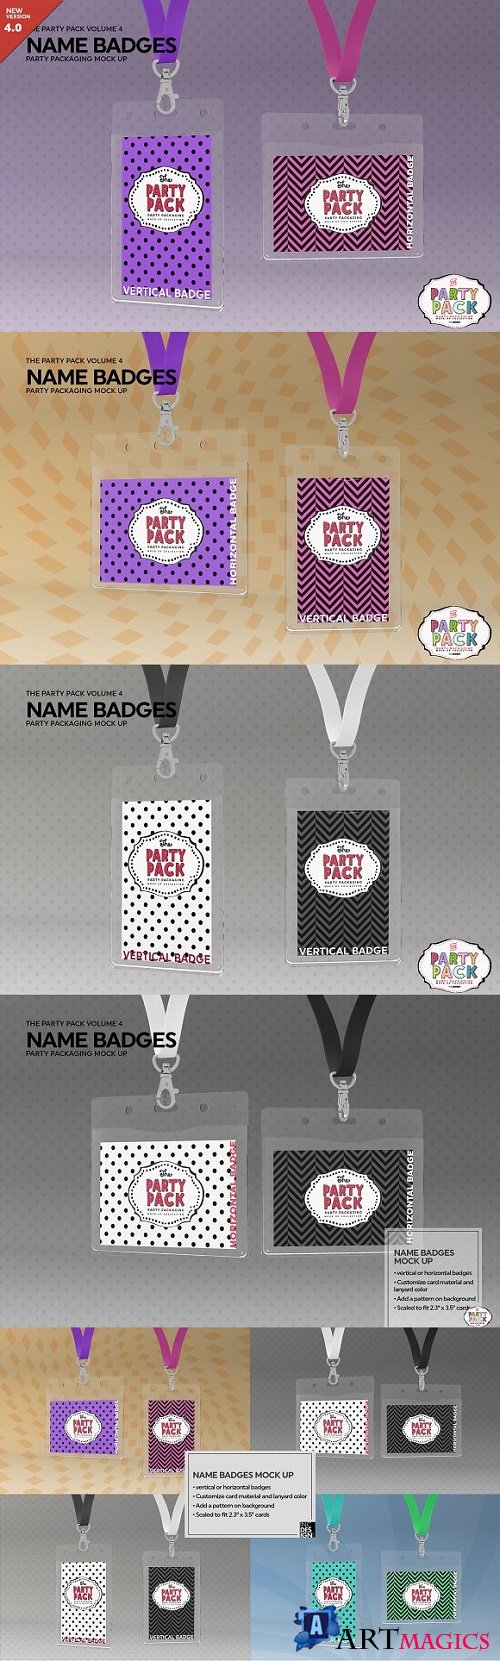 Name Badges with Lanyards Mock Up - 2199329